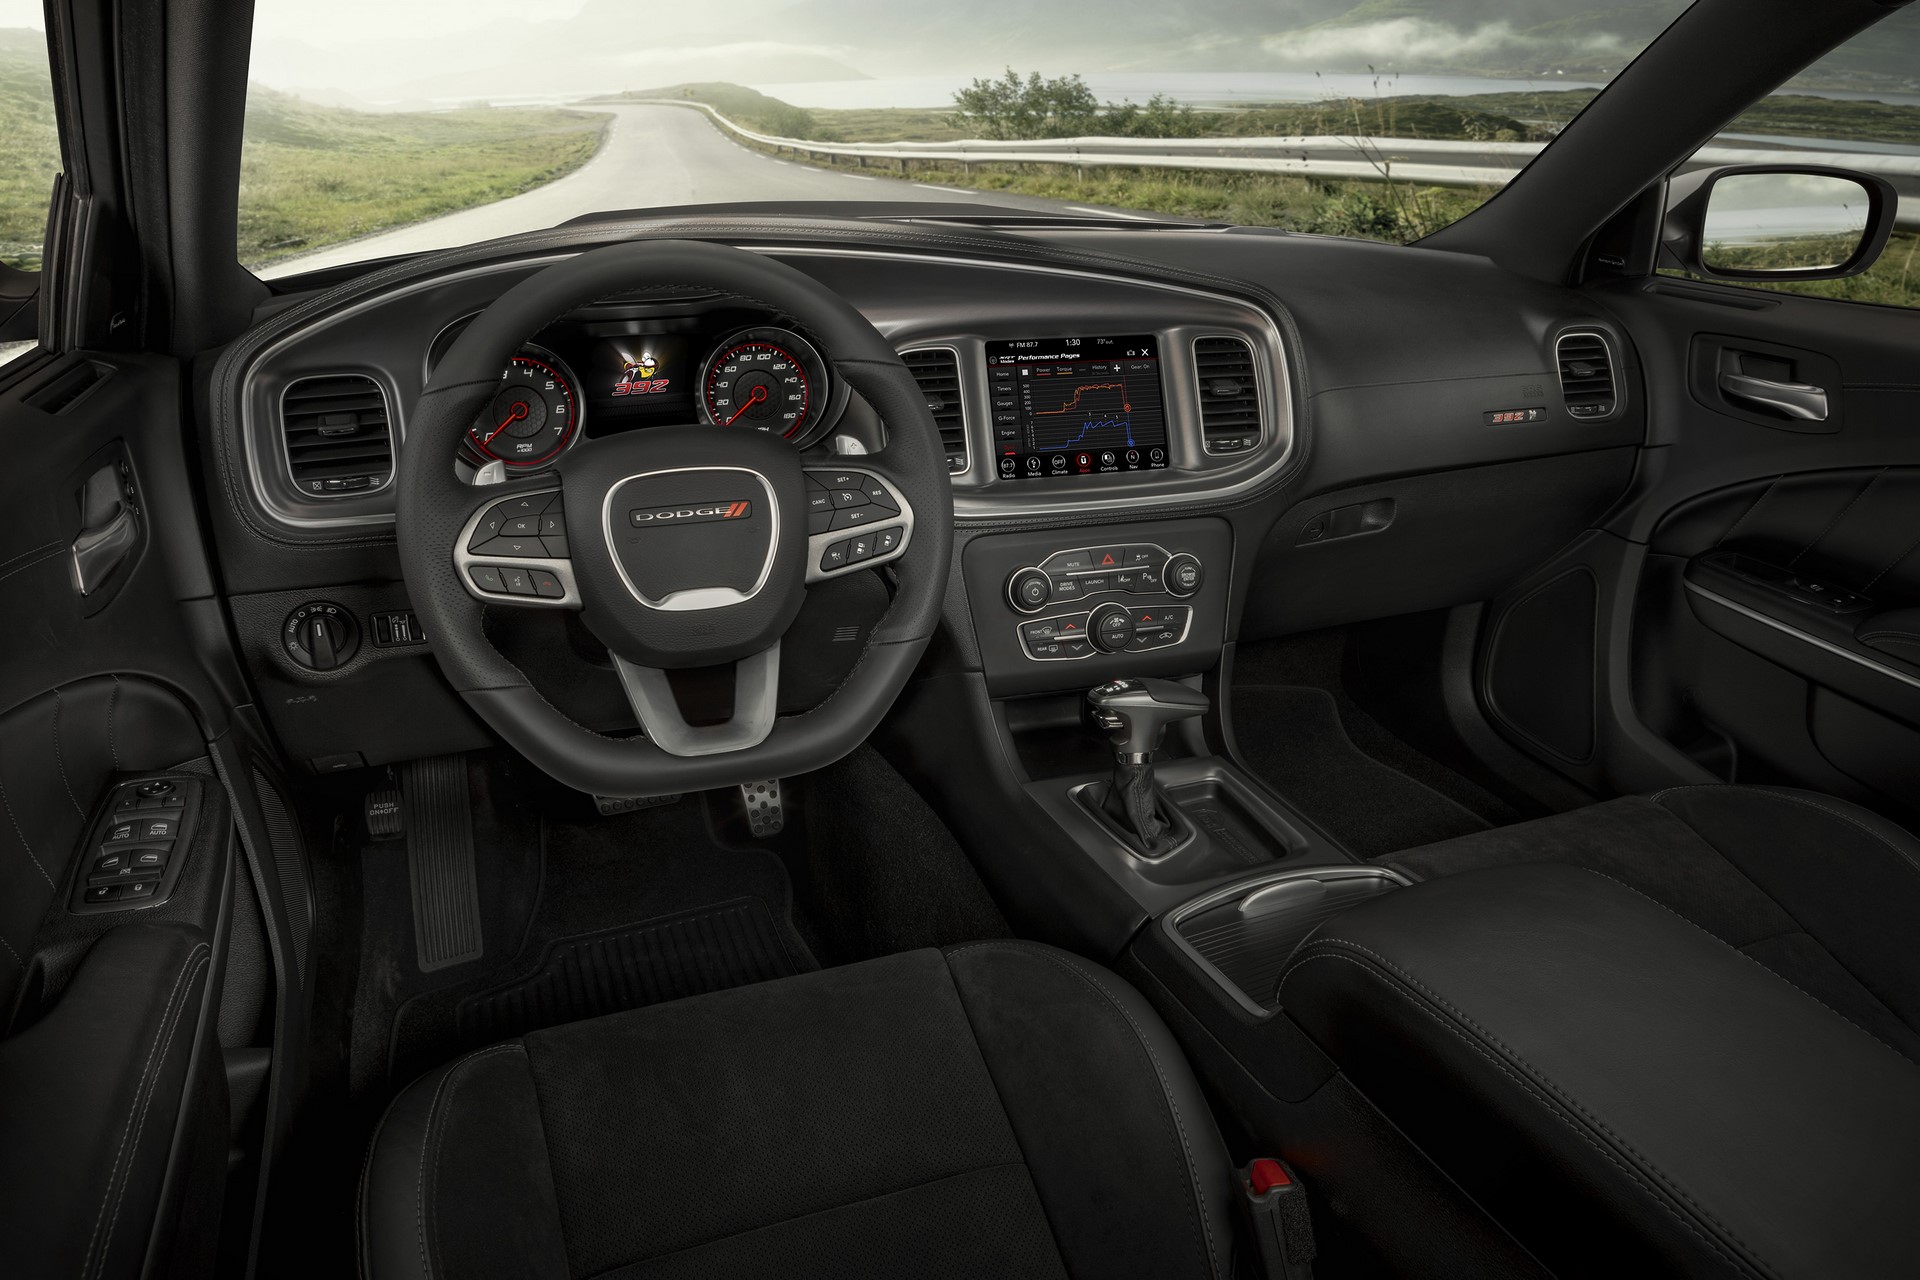 The 2020 Dodge Charger Scat Pack Widebody features an available new leather flat-bottom steering wheel